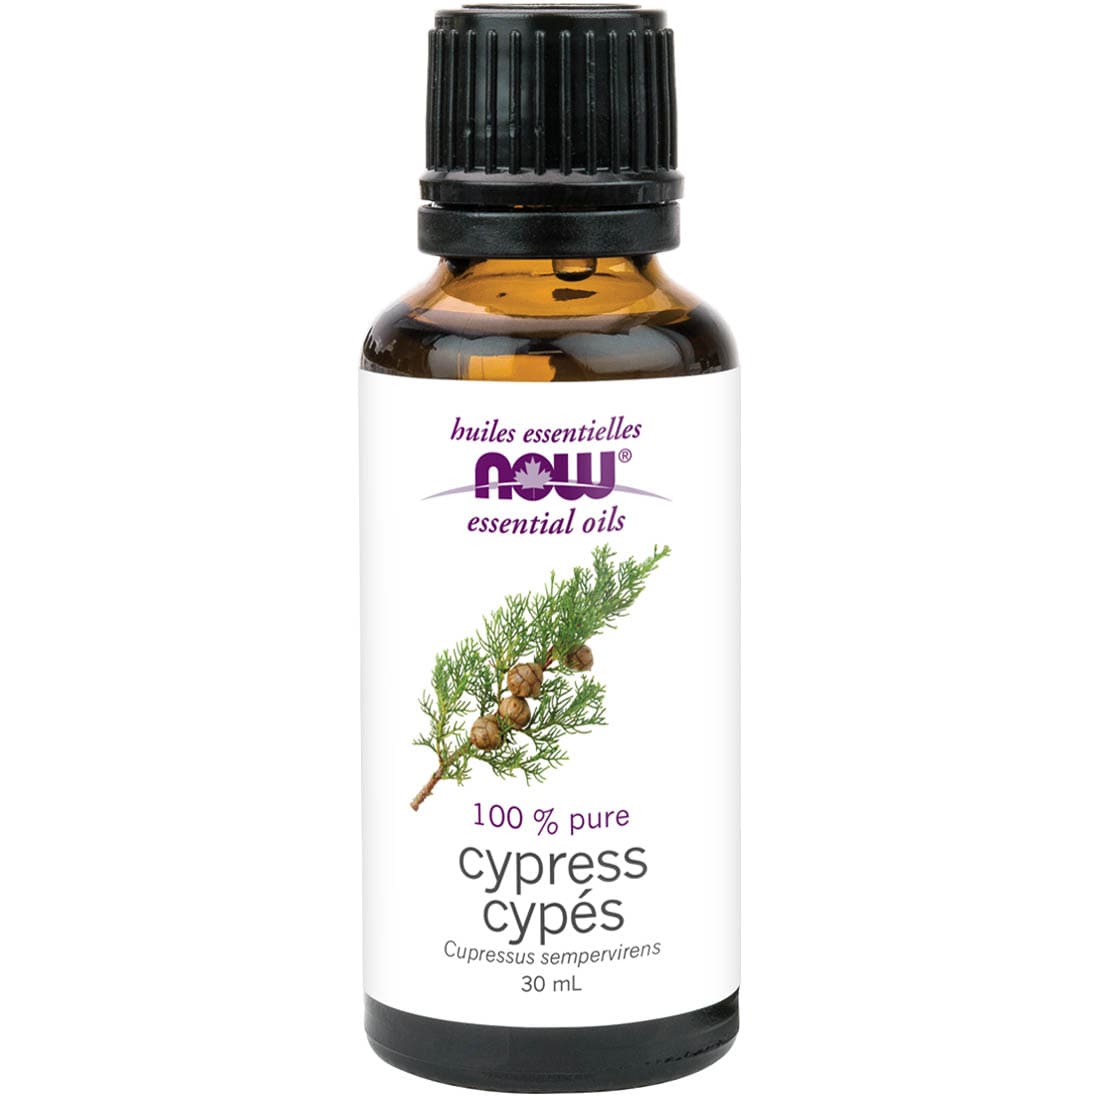 NOW Cypress Oil Pure (Aromatherapy), 30ml